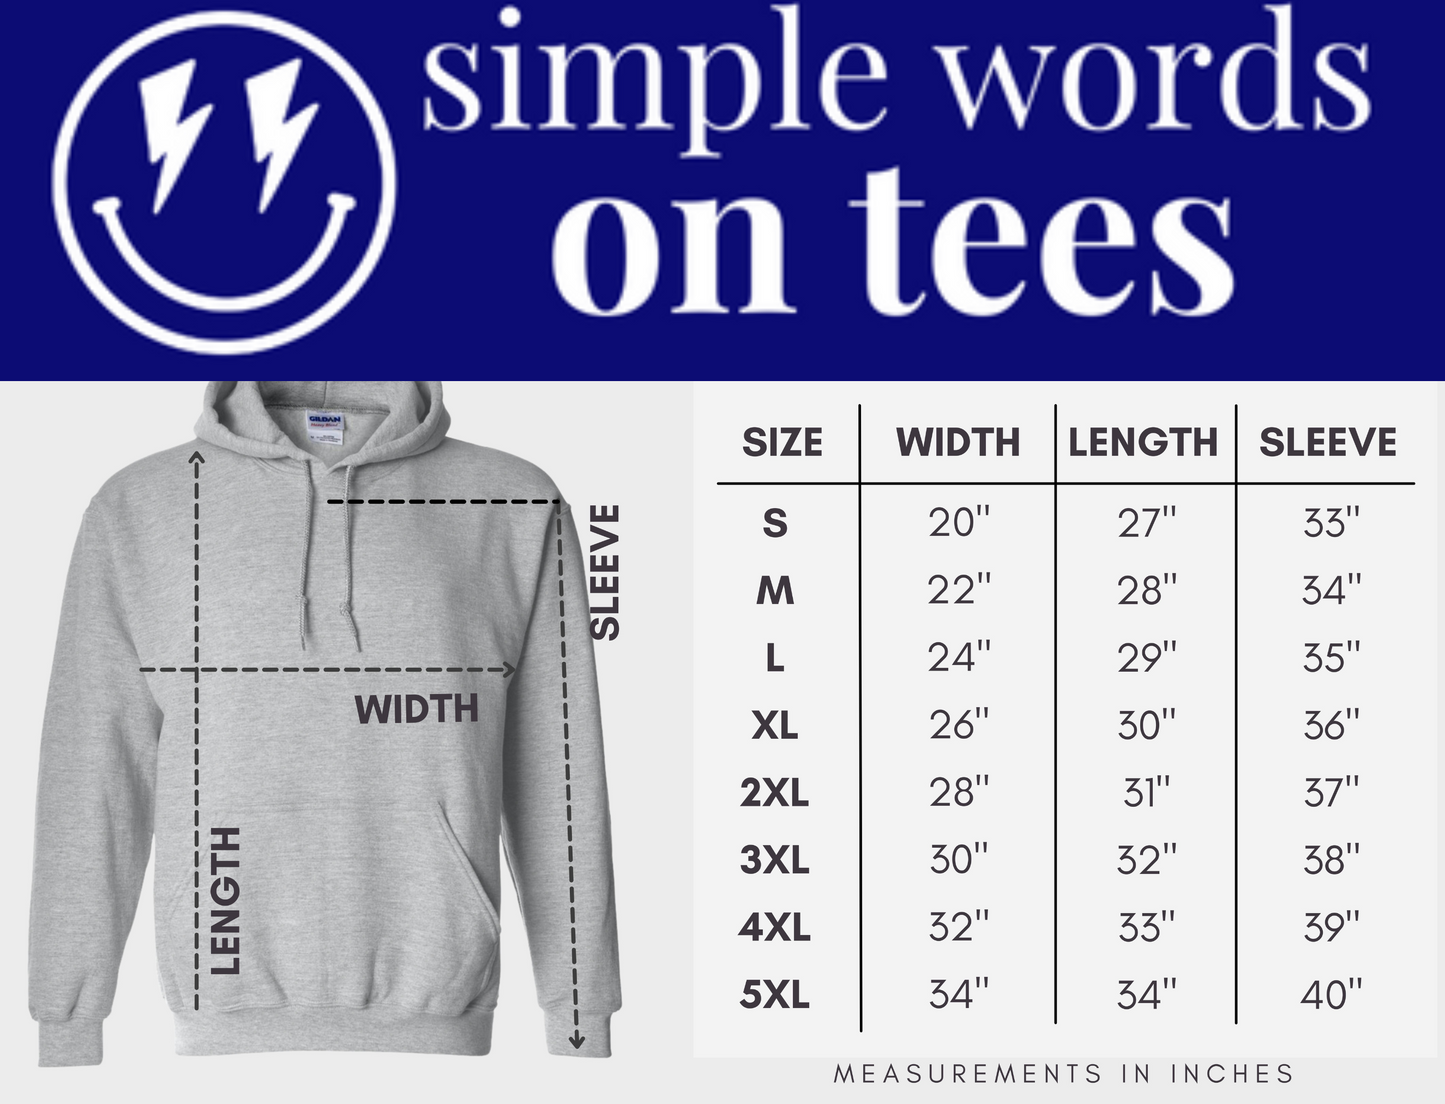 Jimmy Eat World "The Middle" Emo Kid Hoodie